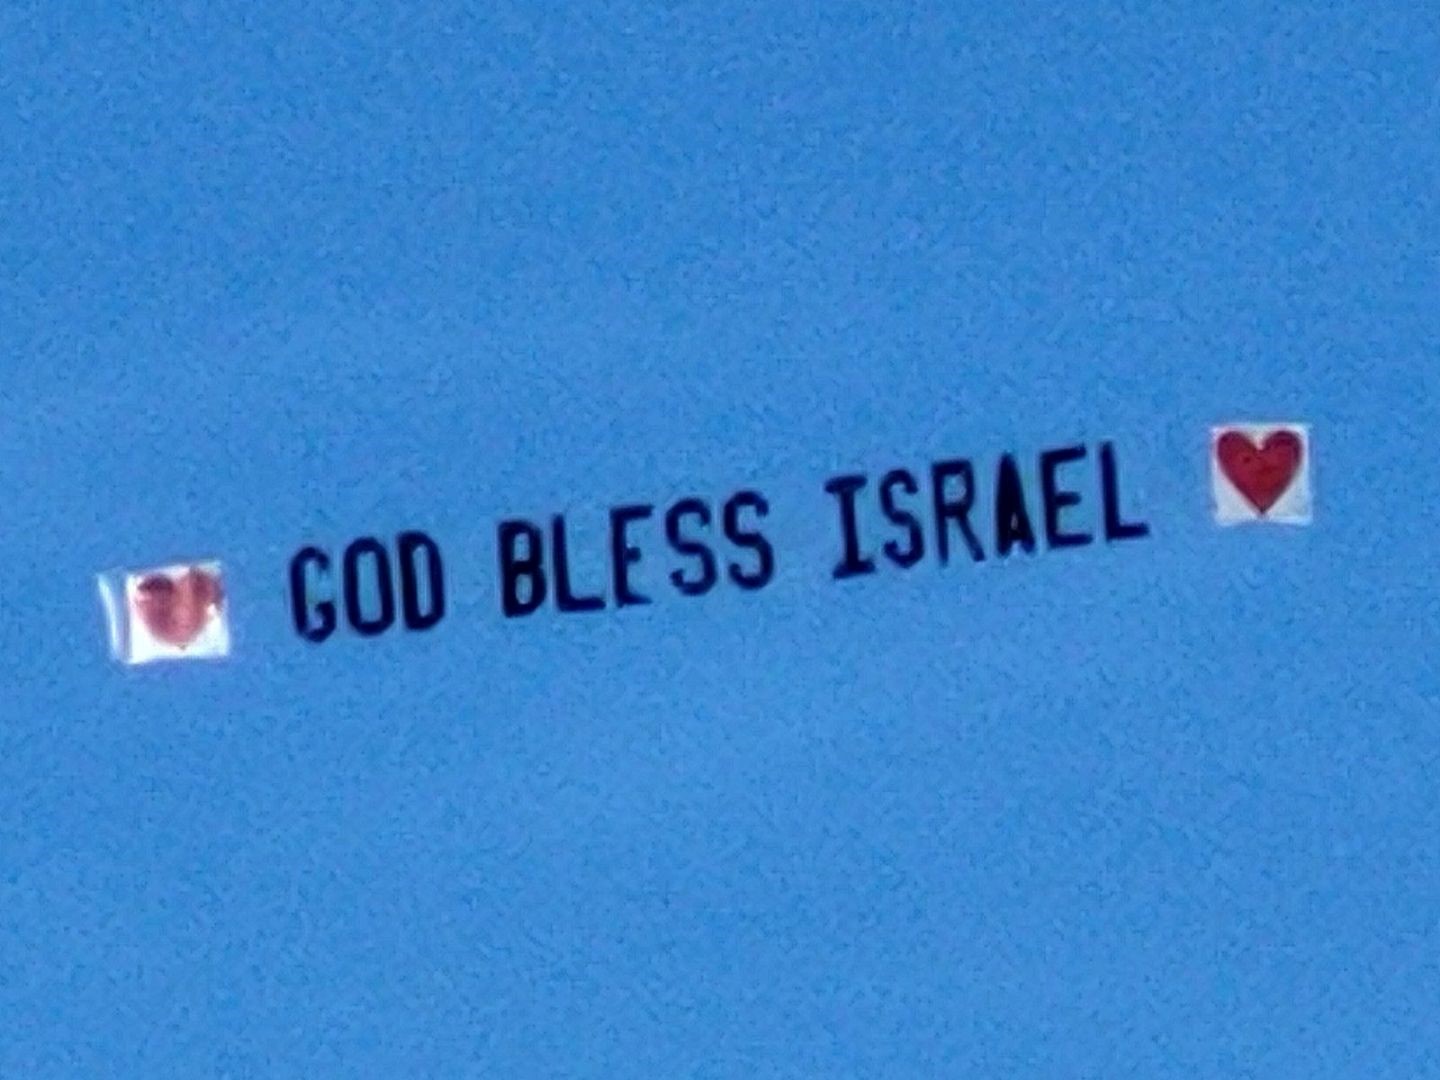 Patriot Mobile Flies Pro-Israel Sky Banners Nationwide